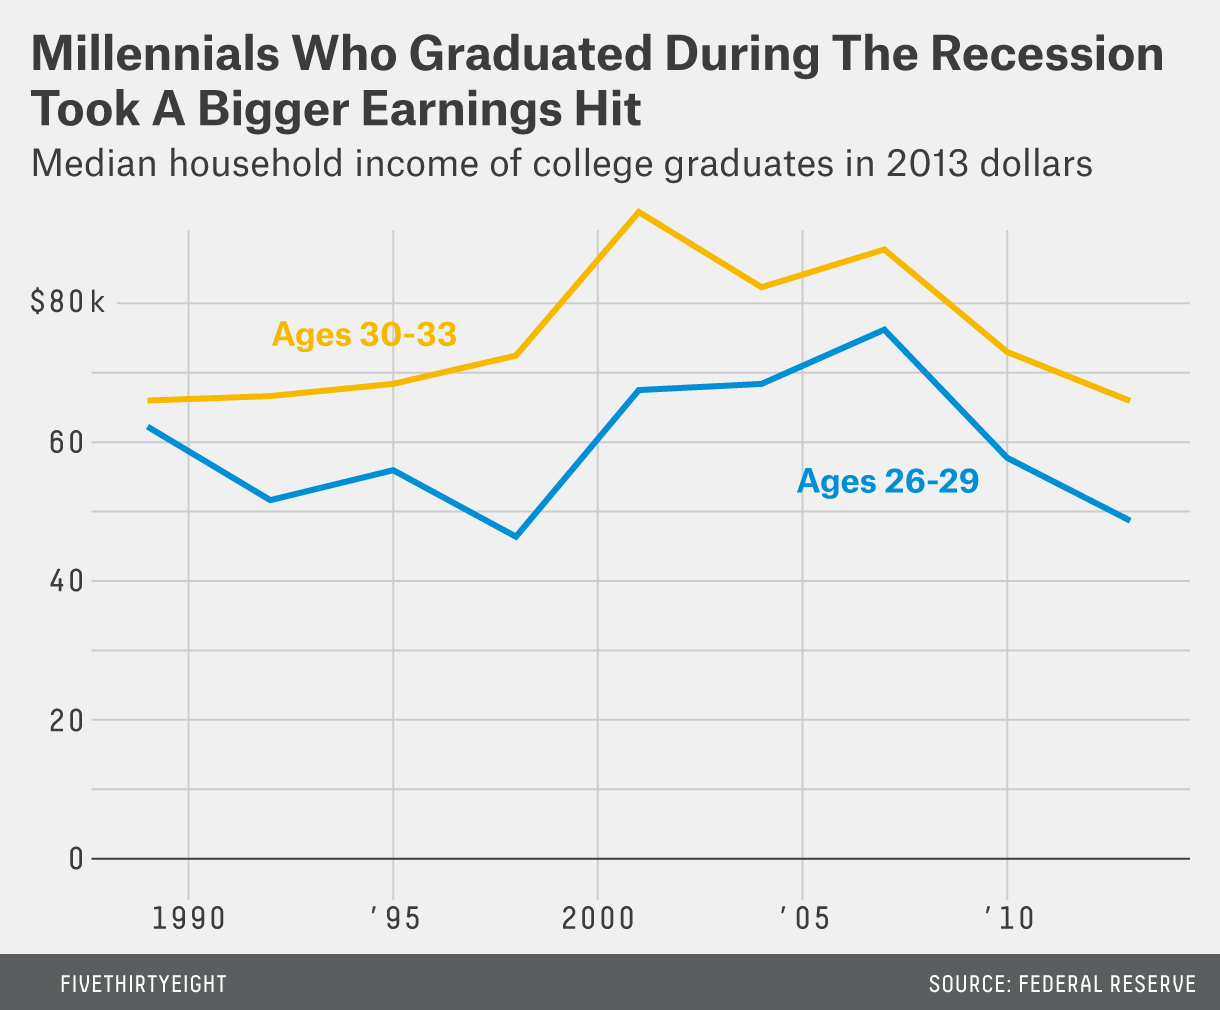 Millennials who graduated during the recession